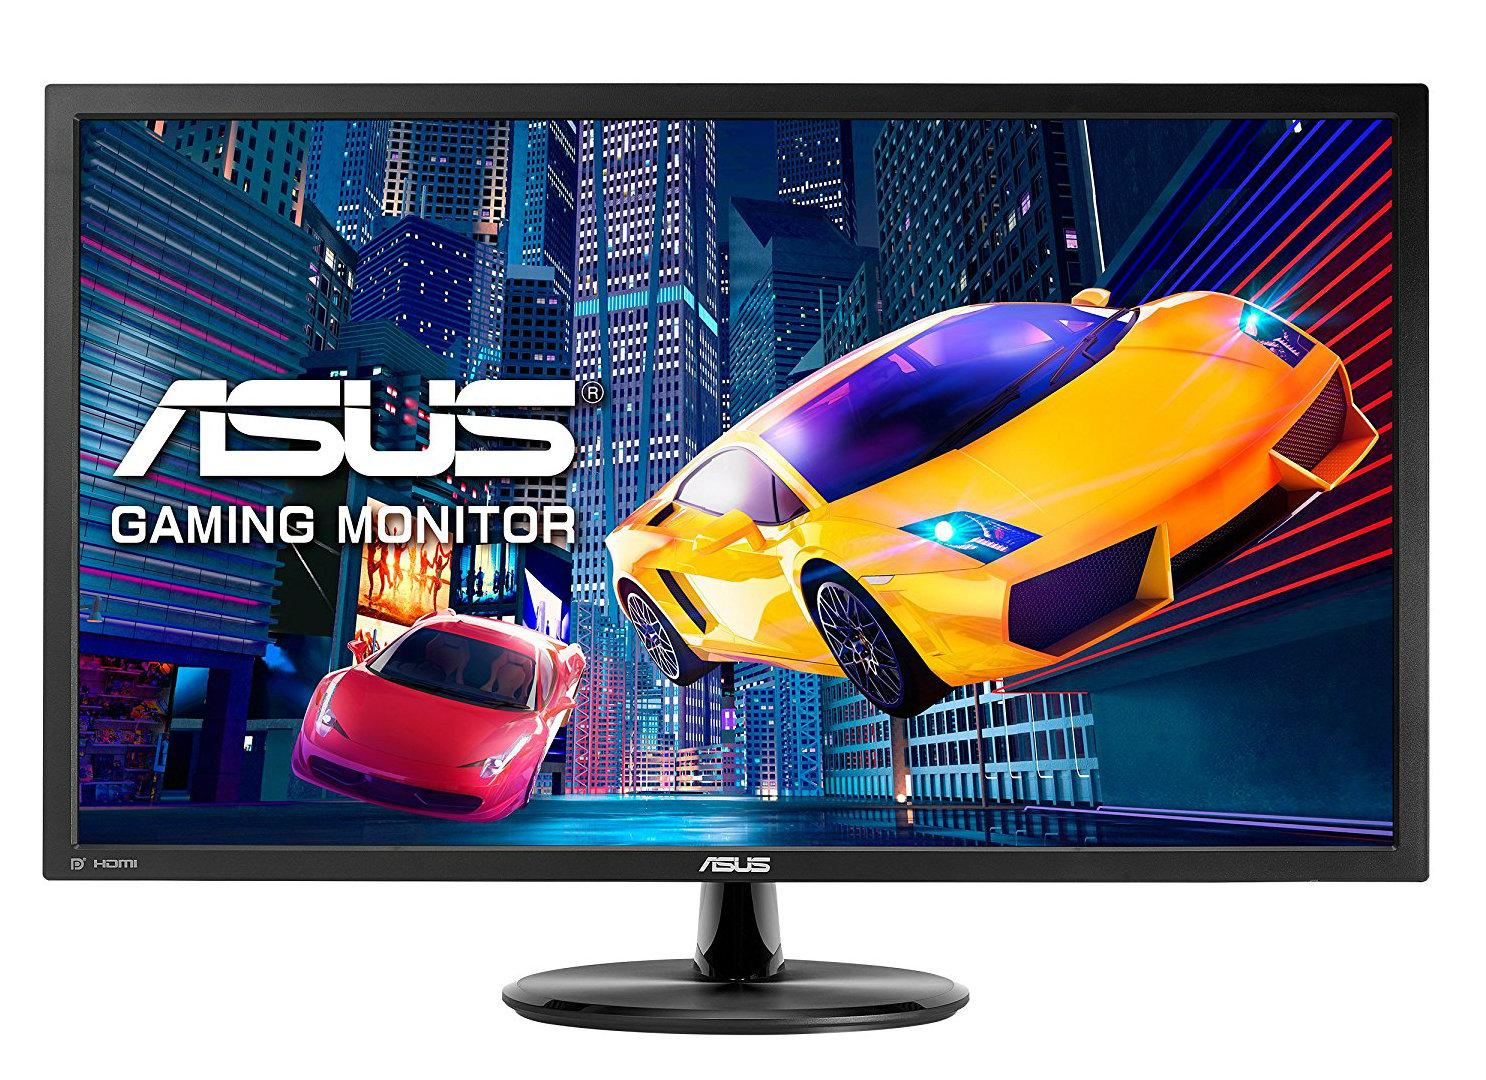 competitive 4k gaming monitor